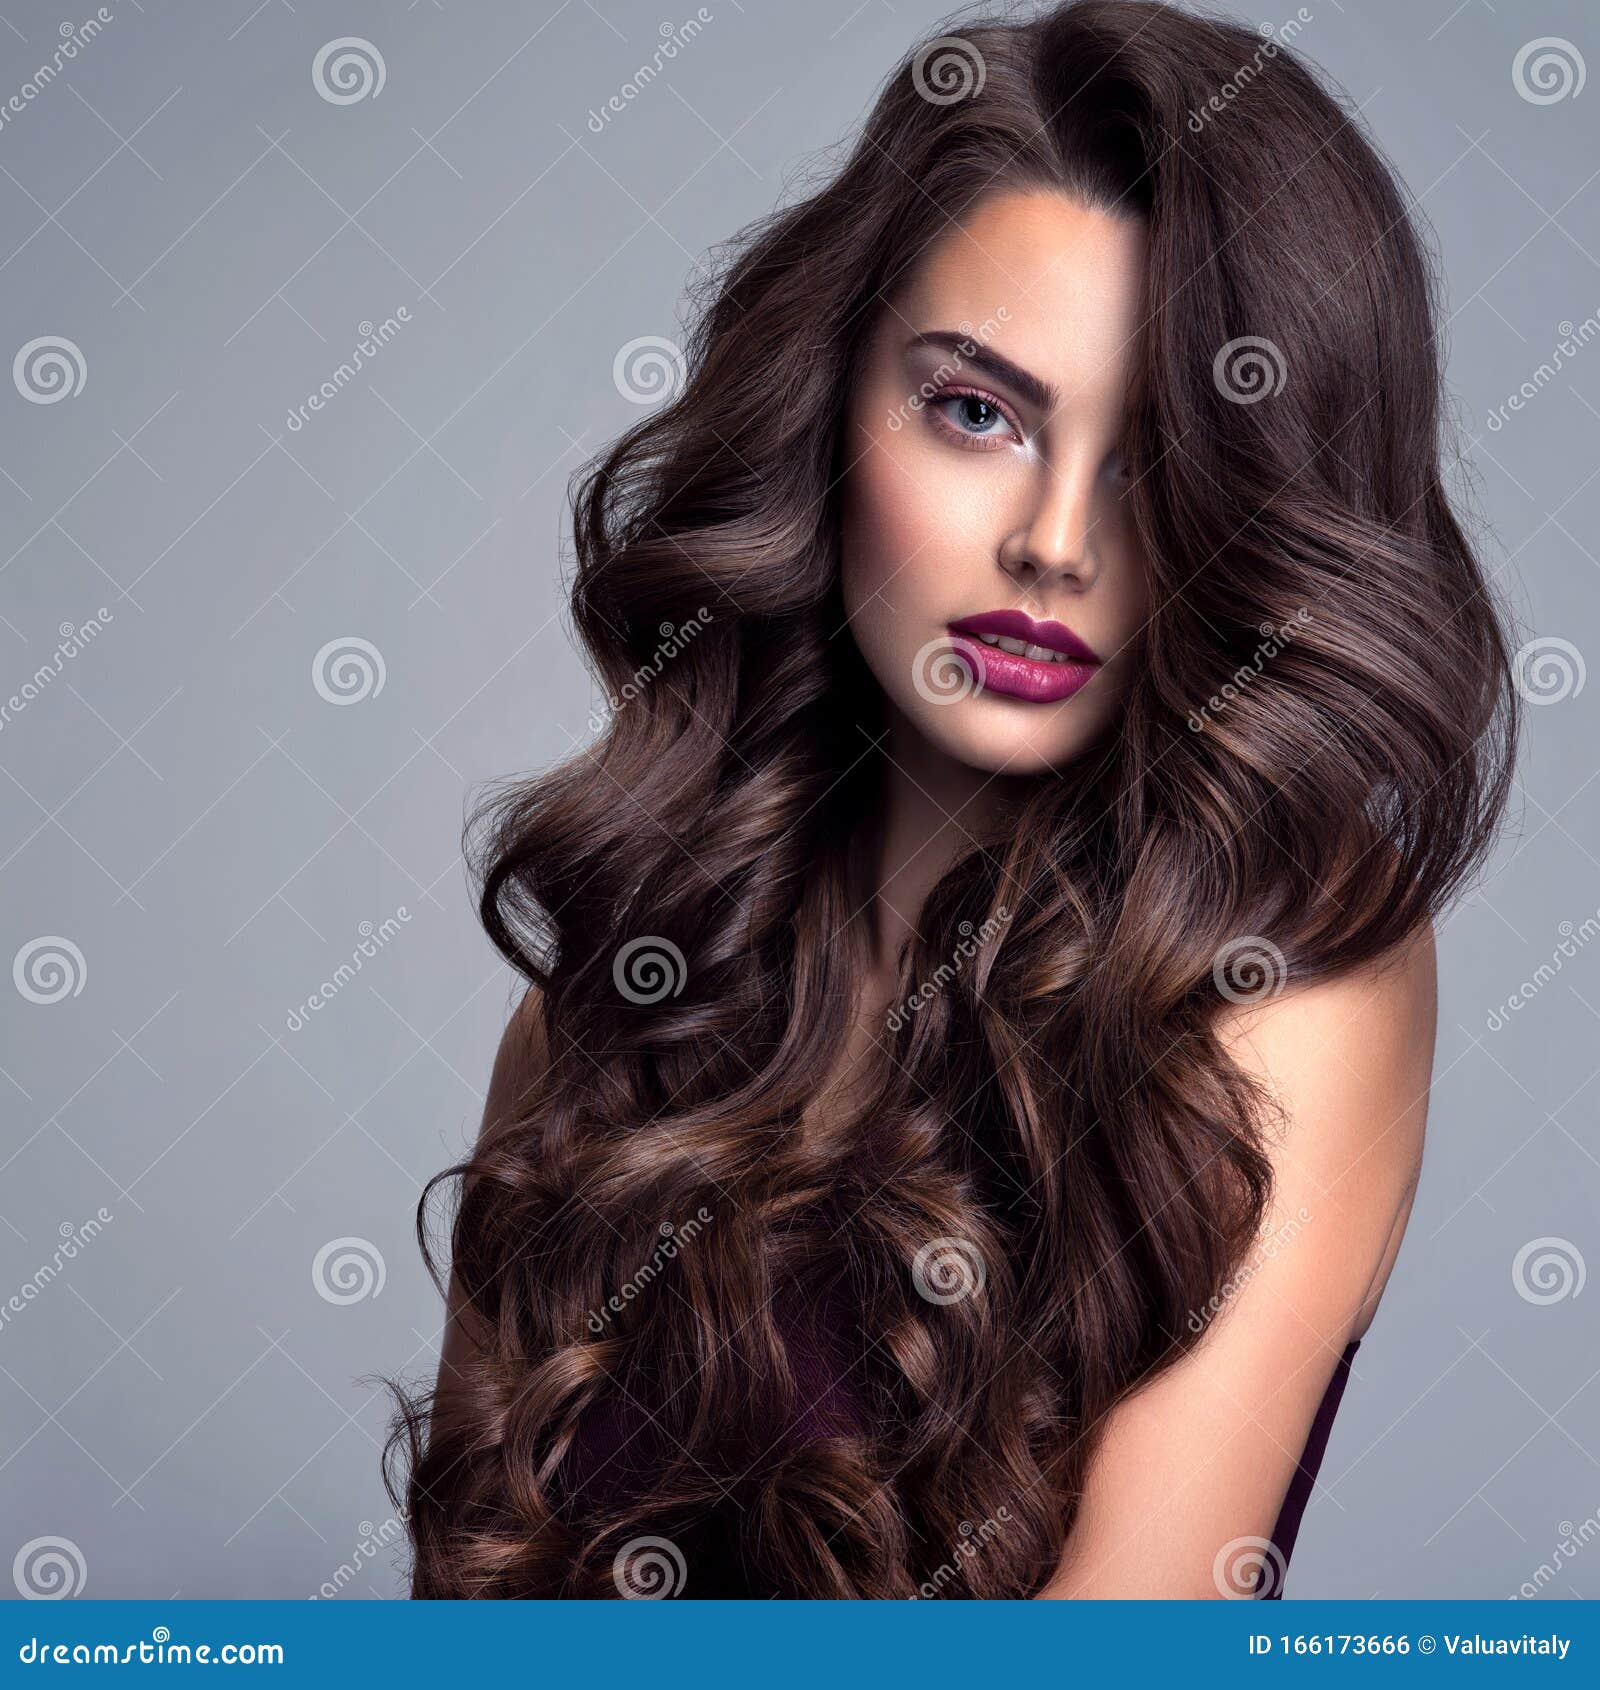 Face of a Beautiful Woman with Long Brown Curly Hair. Fashion Model with Wavy  Hairstyle. Attractive Young Girl with Curly Hair Stock Photo - Image of  model, brown: 166173666